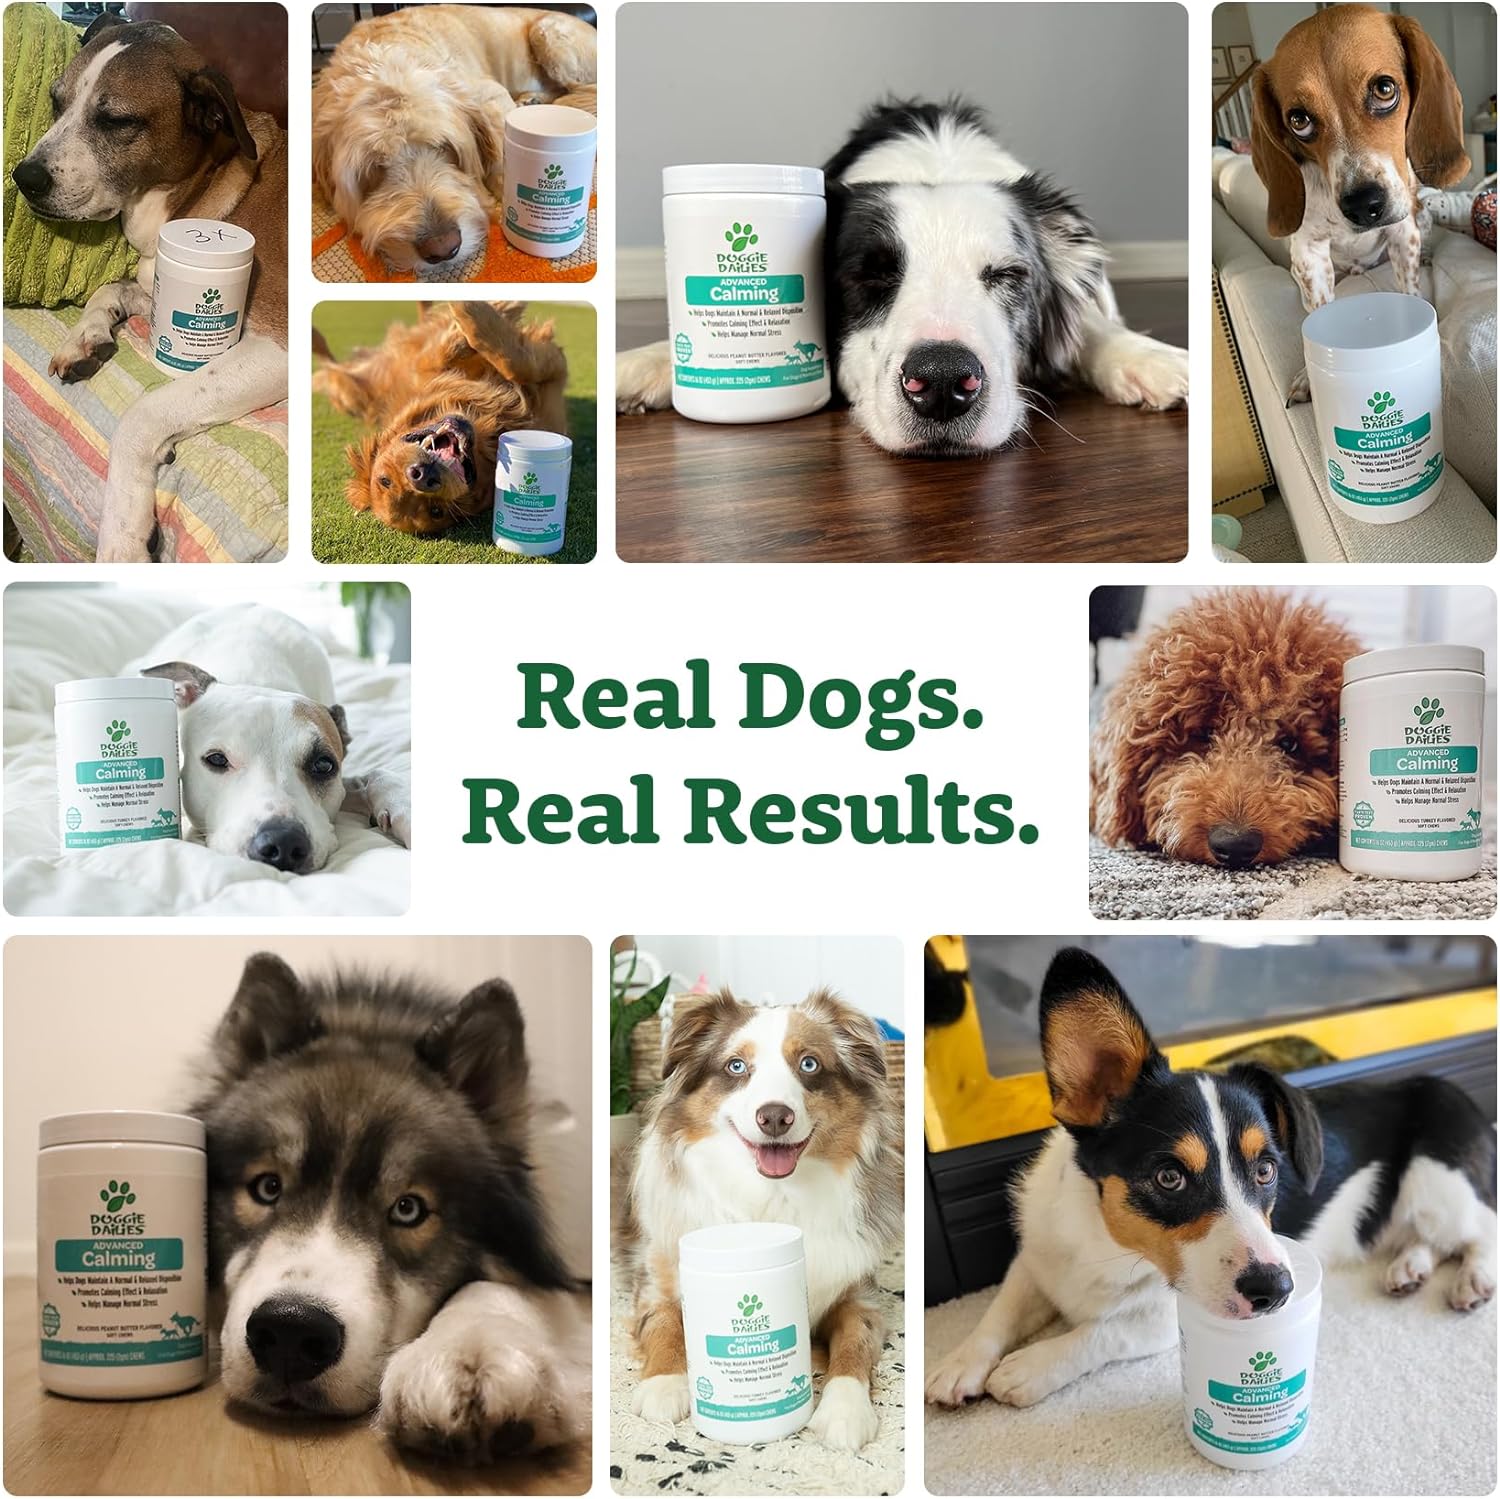 Doggie Dailies Calming Chews for Dogs, 225 Soft Chews, Melatonin for Dogs with Chamomile to Help Manage Stress Relief, Calm & Relaxation During Thunderstorms, Fireworks, Travel, & Separation : Pet Supplies